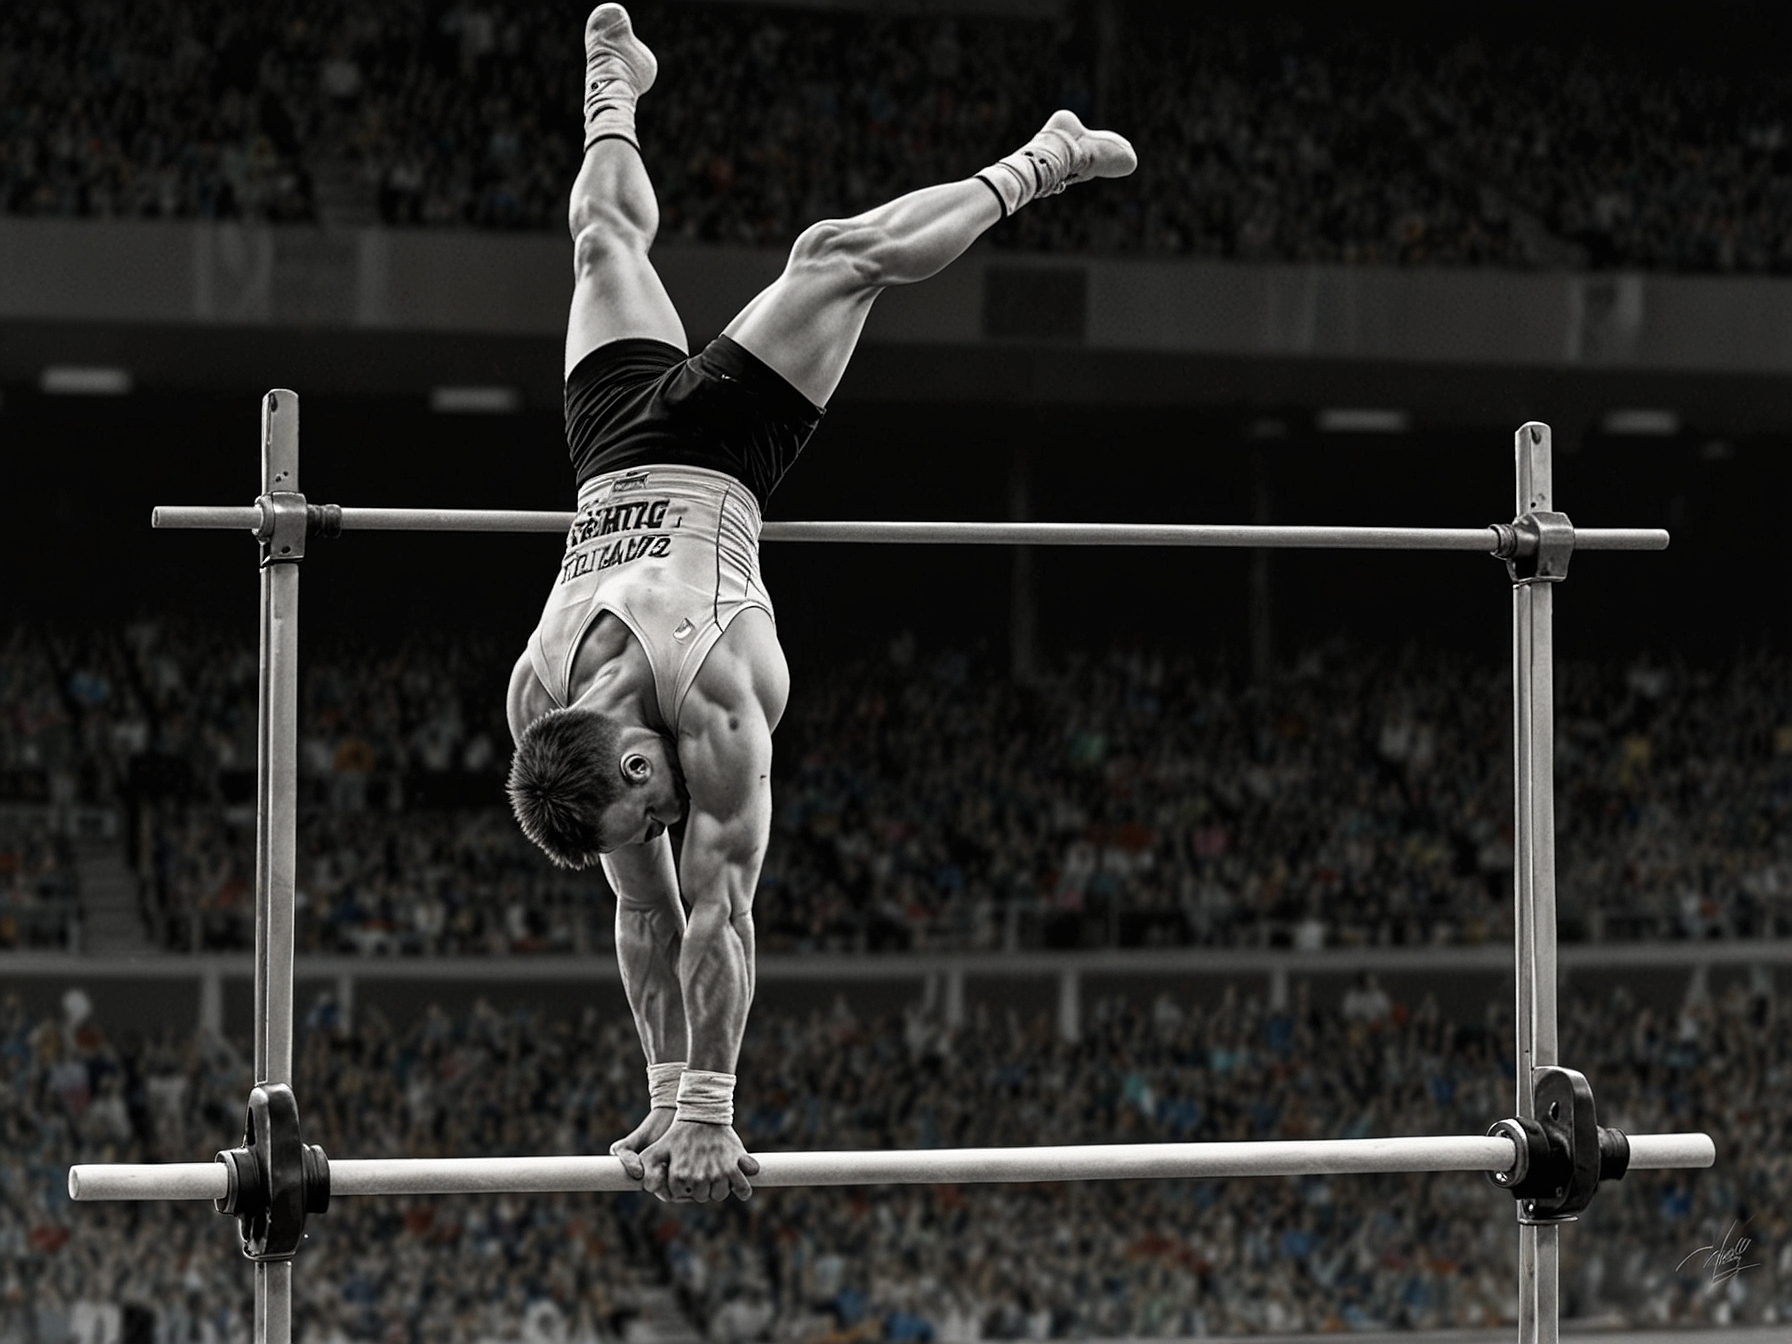 Brody Malone executes a high-difficulty maneuver on the horizontal bar, displaying his experience and precision as a three-time national champion at the U.S. Olympic gymnastics trials.